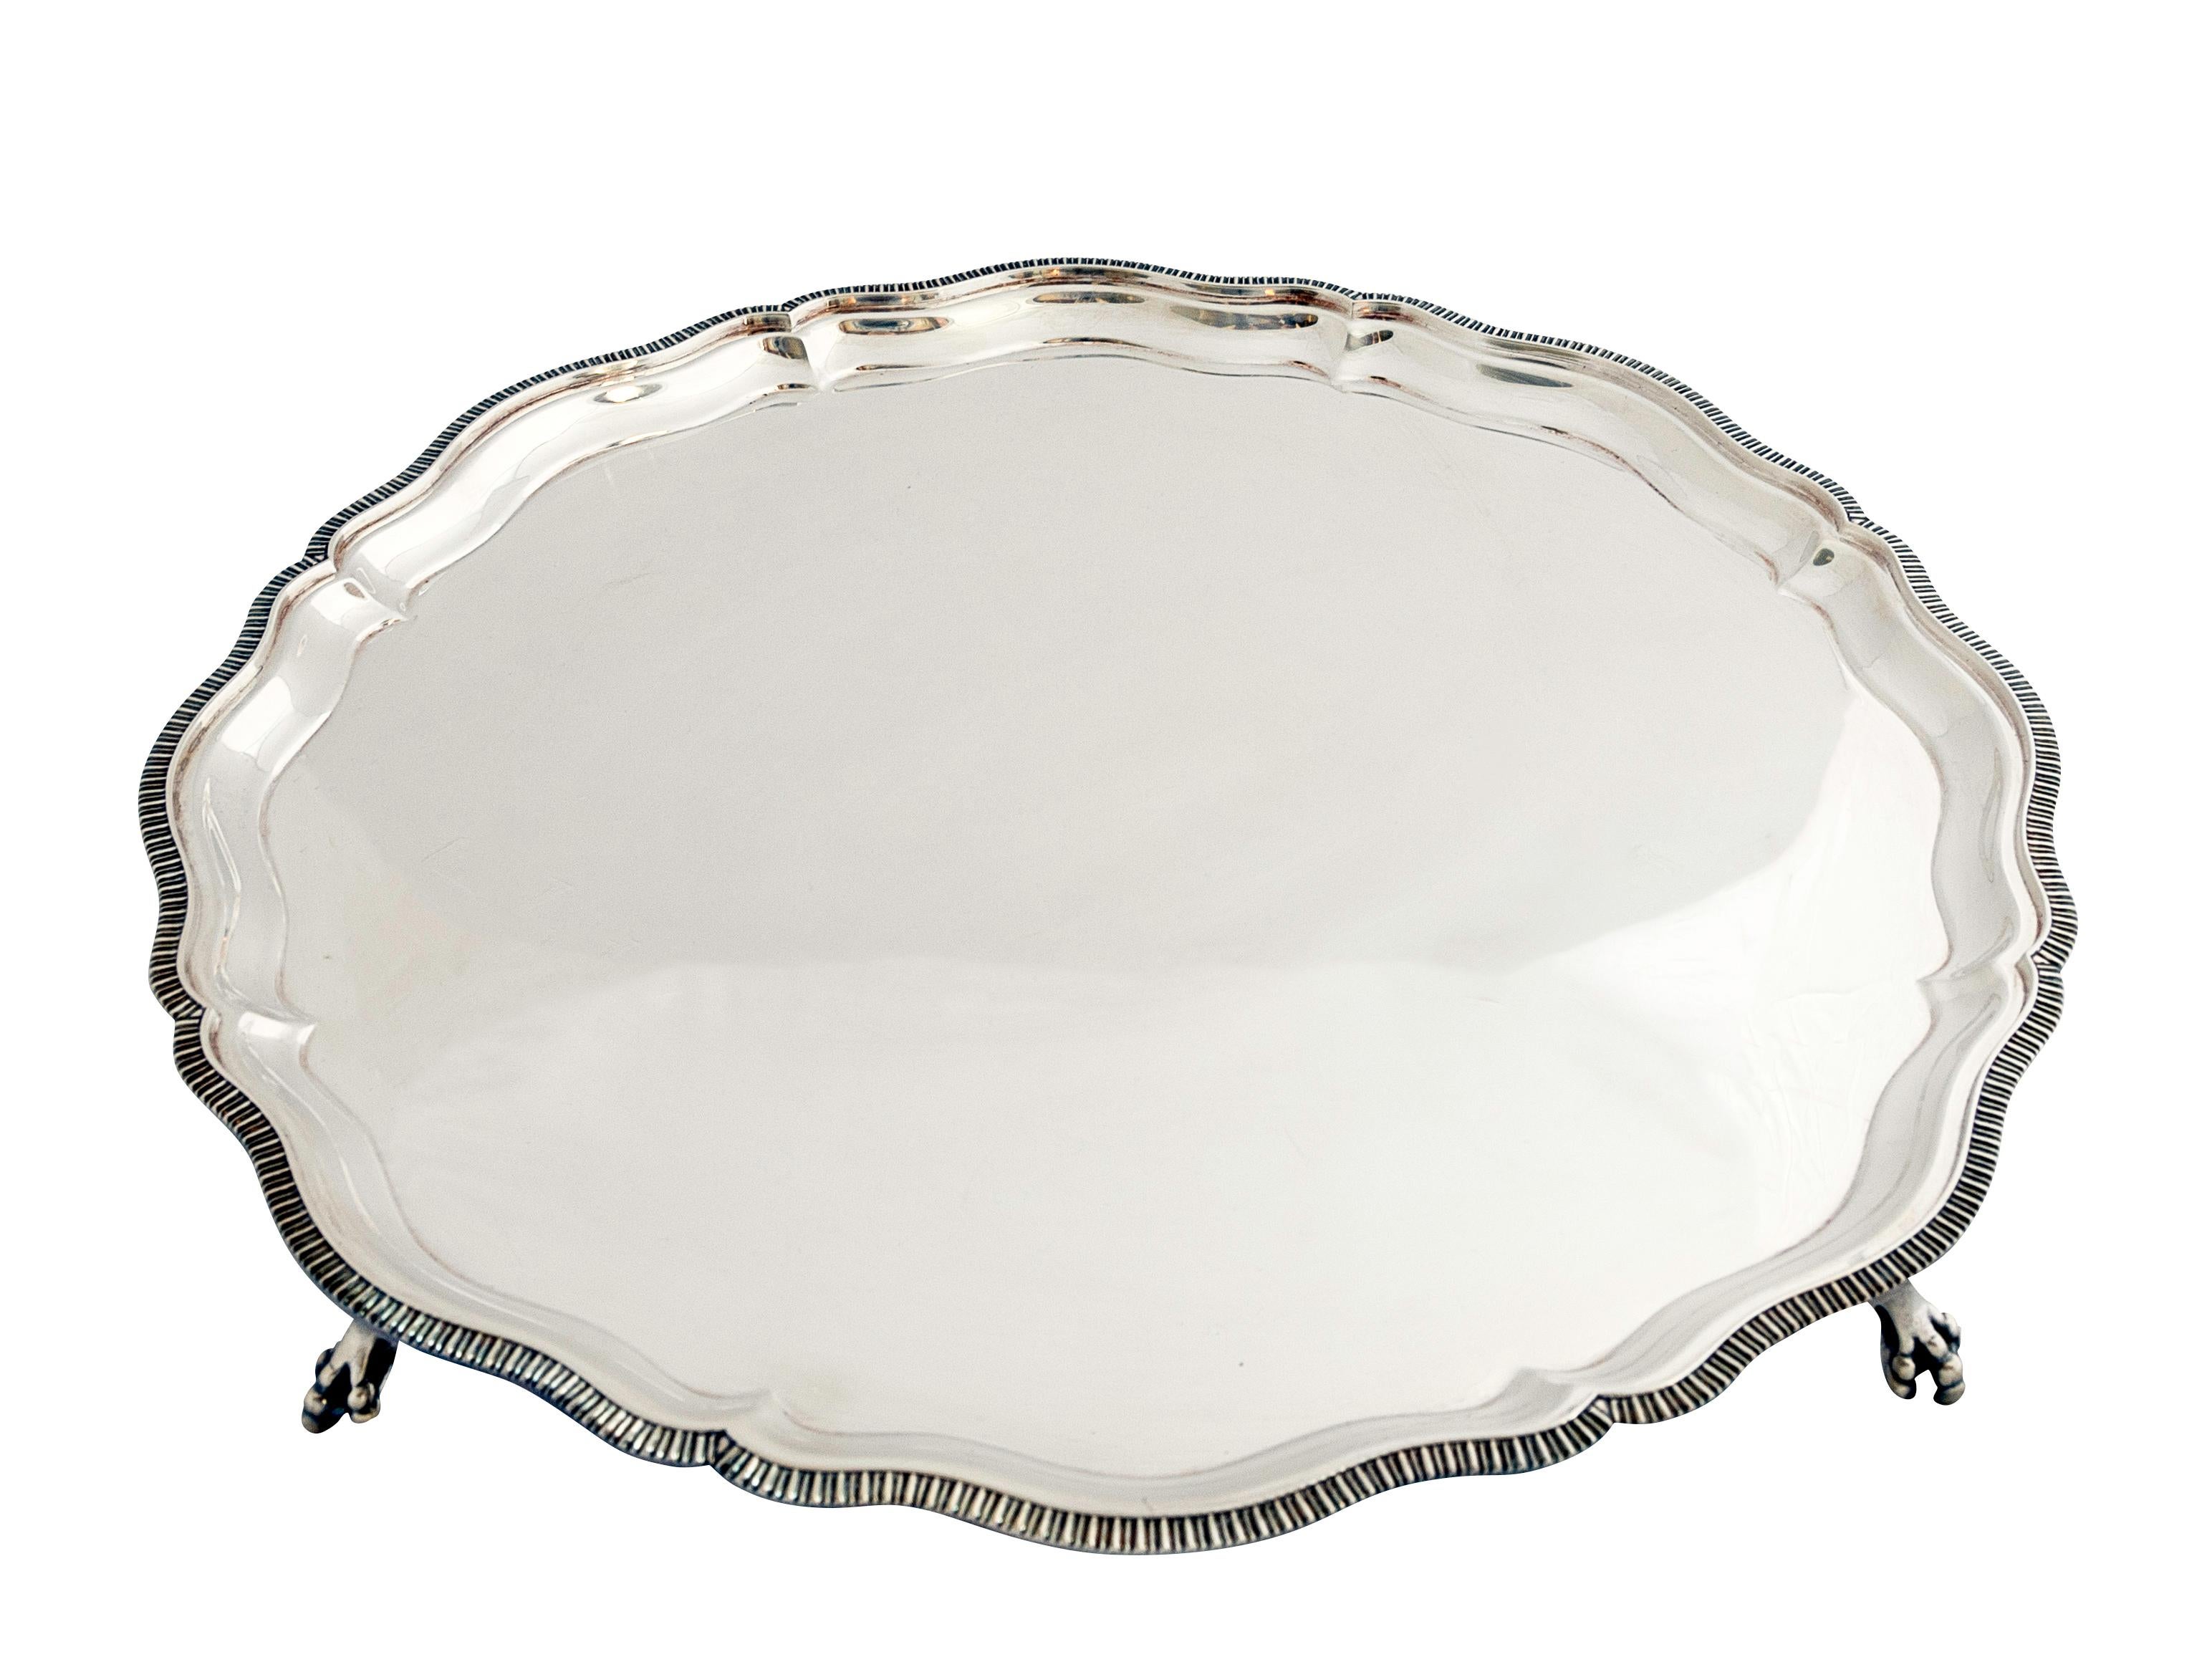 An exceptional, fine and impressive set of two antique Mappin & Web sterling silver trays from Sheffield, England, 1997 hallmark, an addition to our silver dining collection.

These two gorgeous trays are heavy, very thick, with a few signs of use